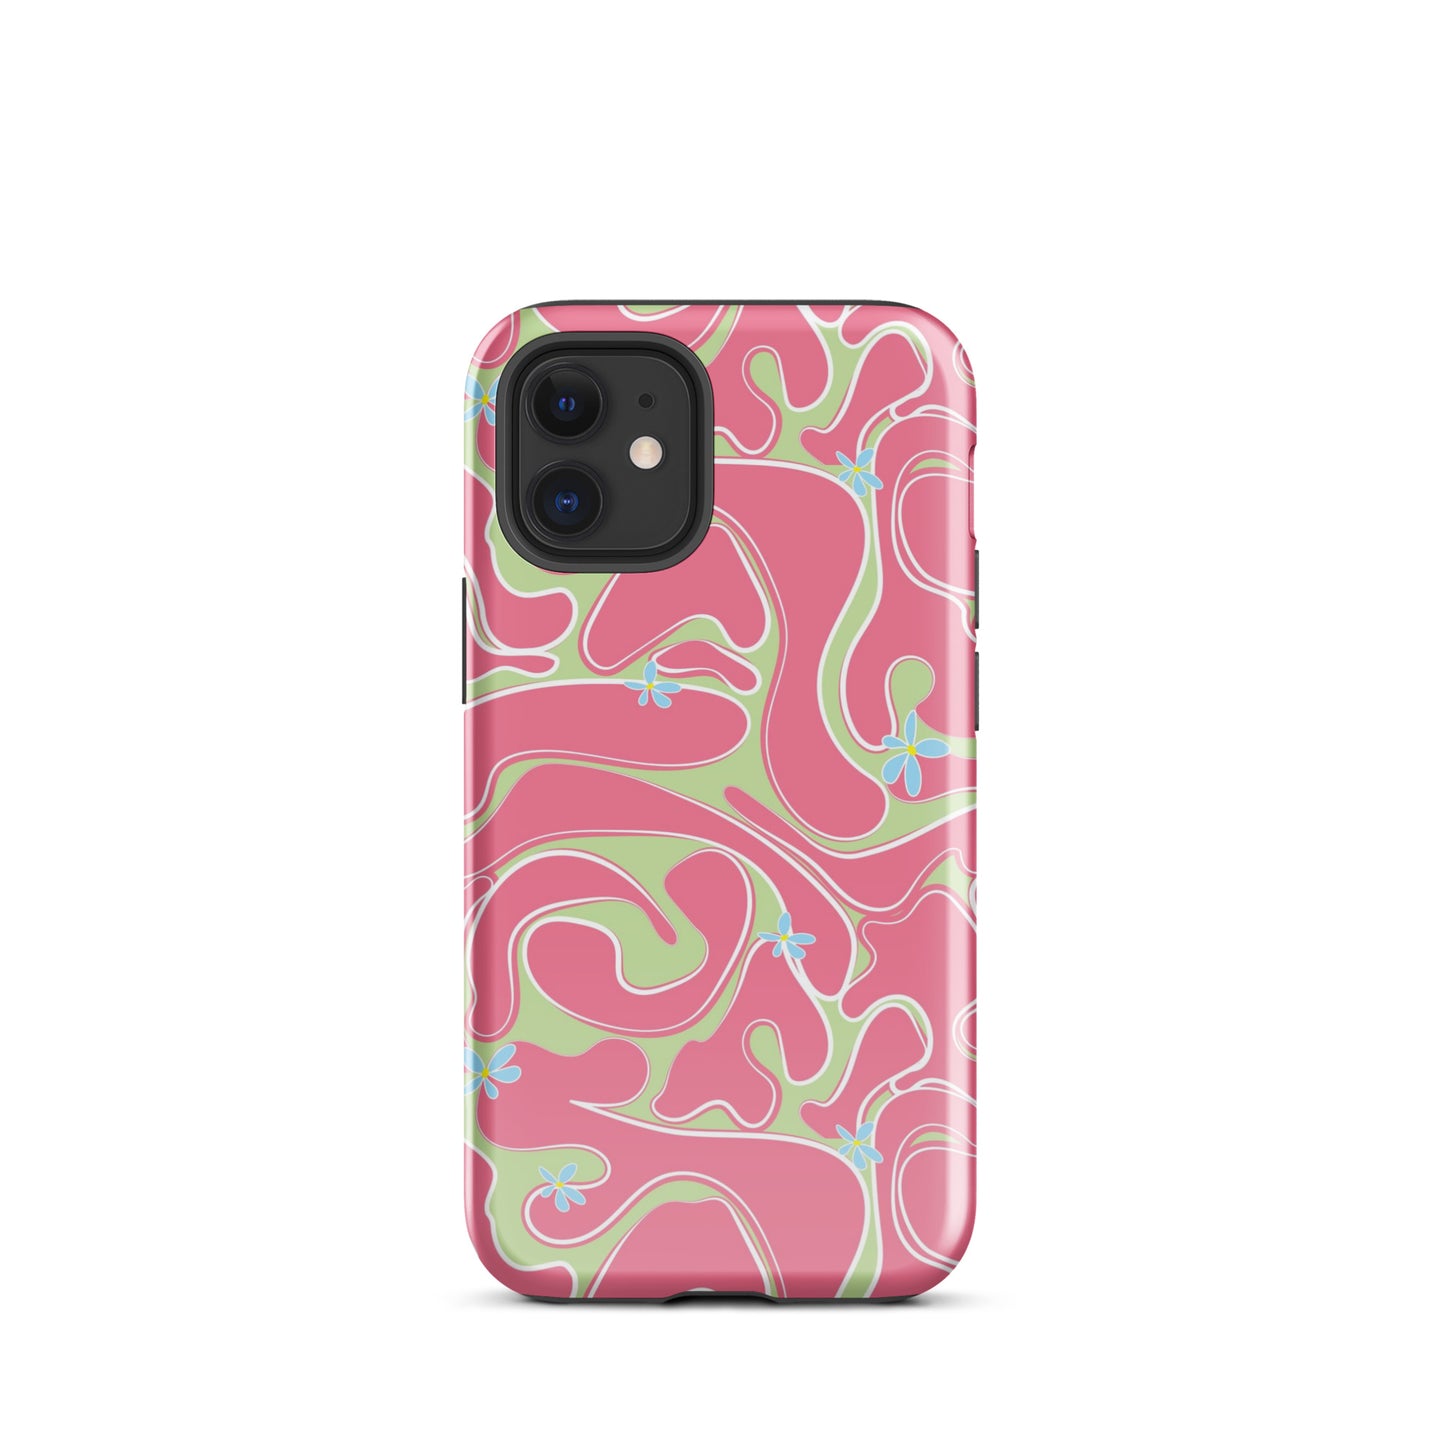 Reef Waves iPhone Case Glossy iPhone 12 mini